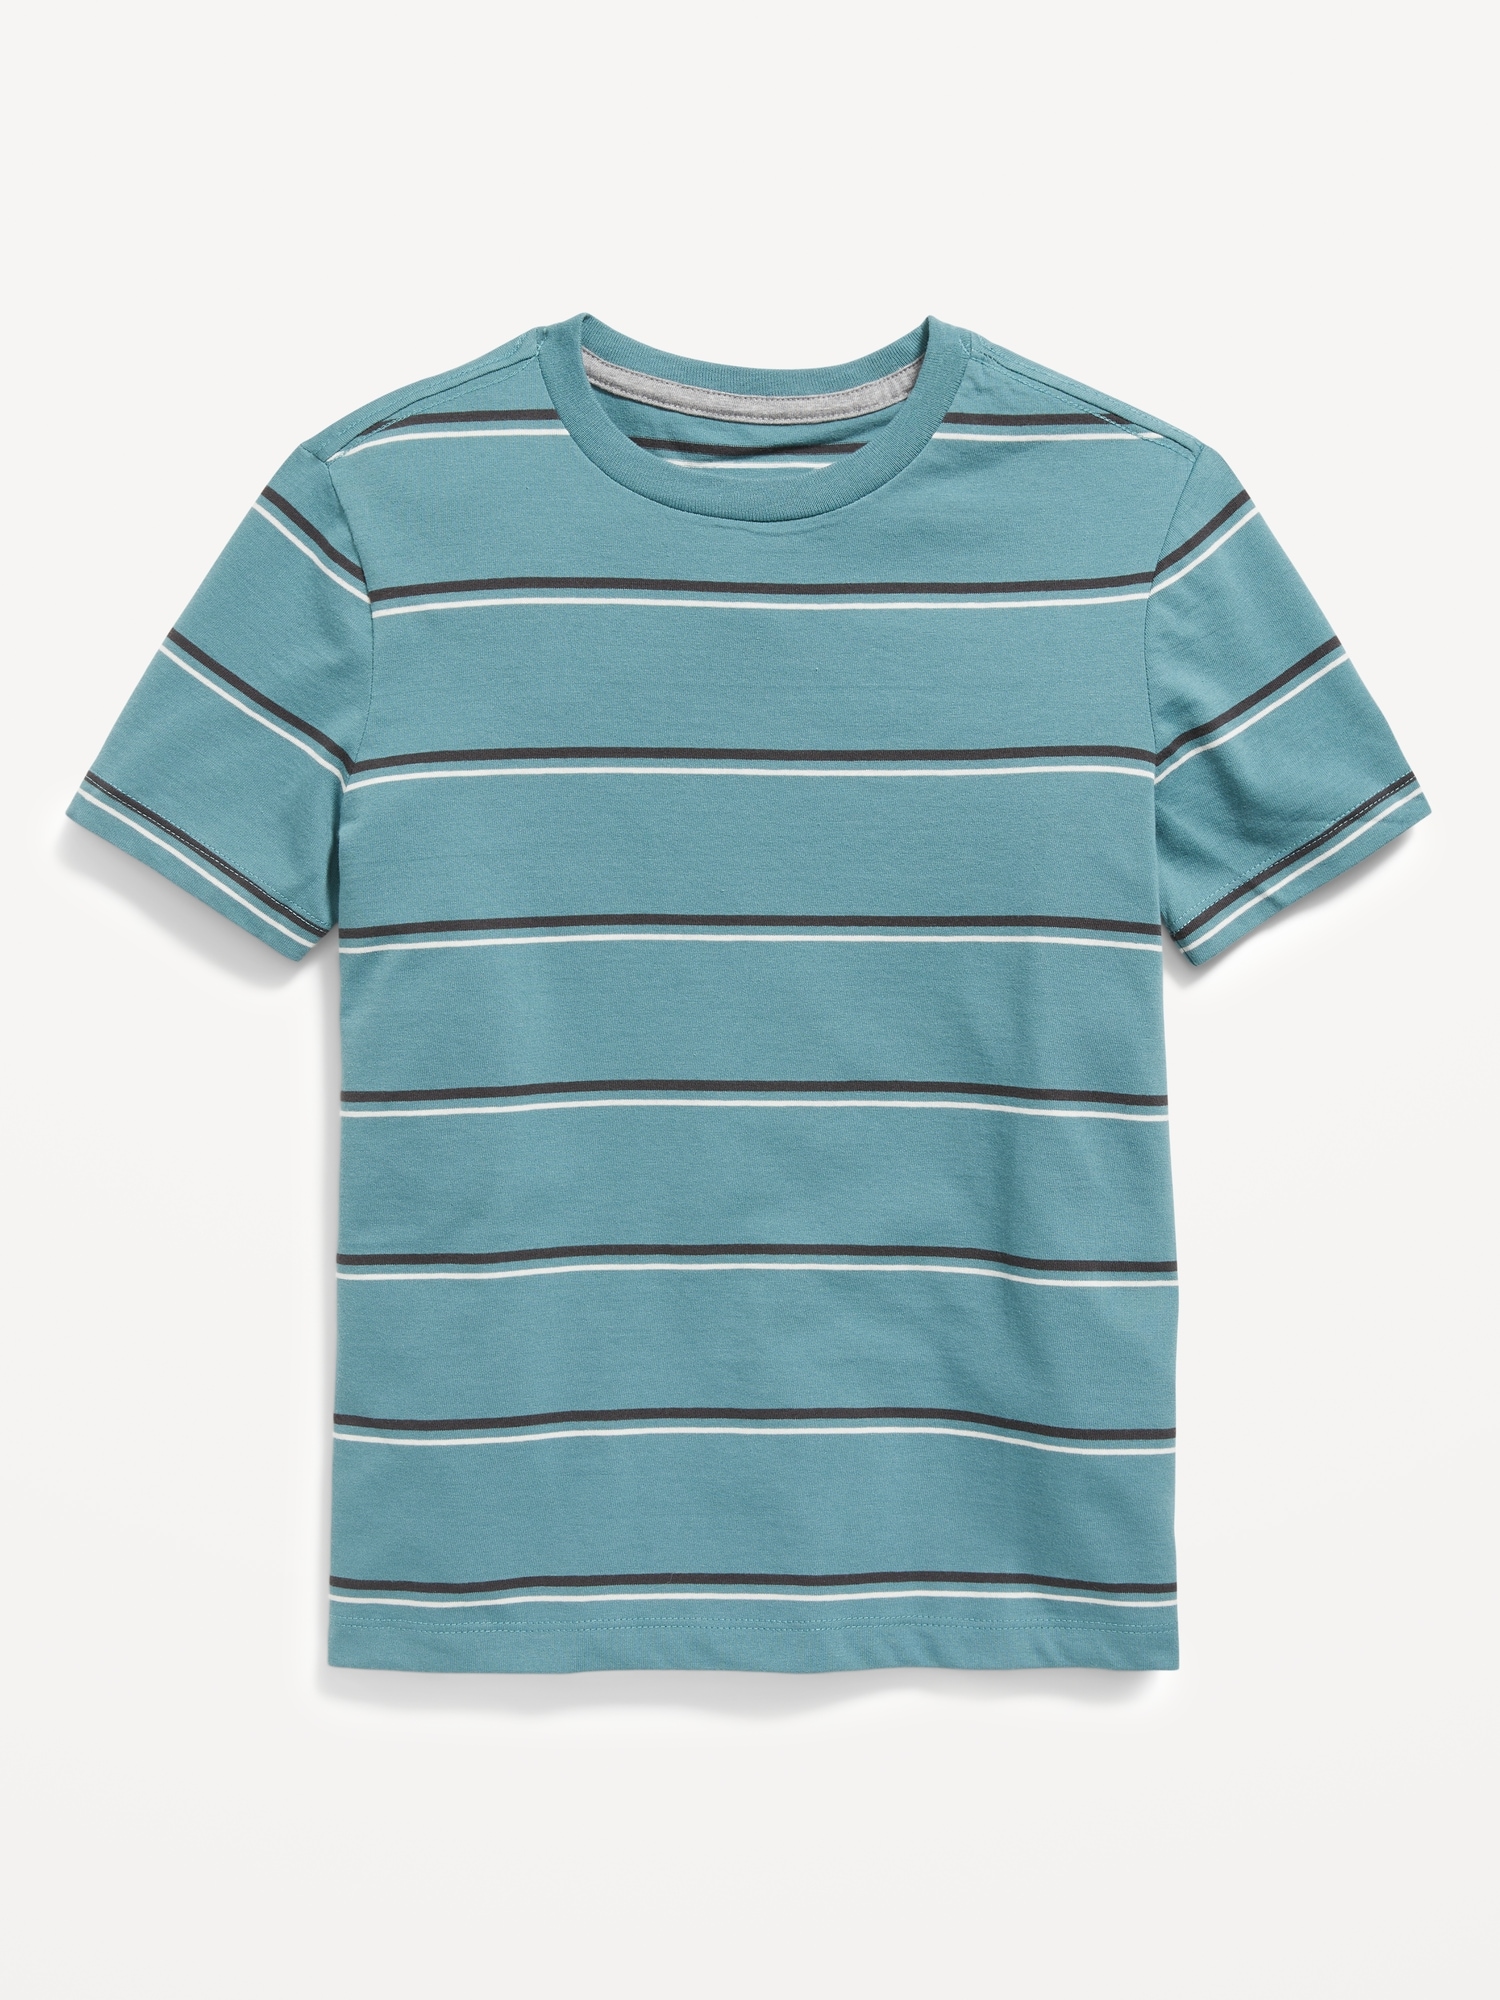 Old Navy Softest Short-Sleeve Striped T-Shirt for Boys blue. 1